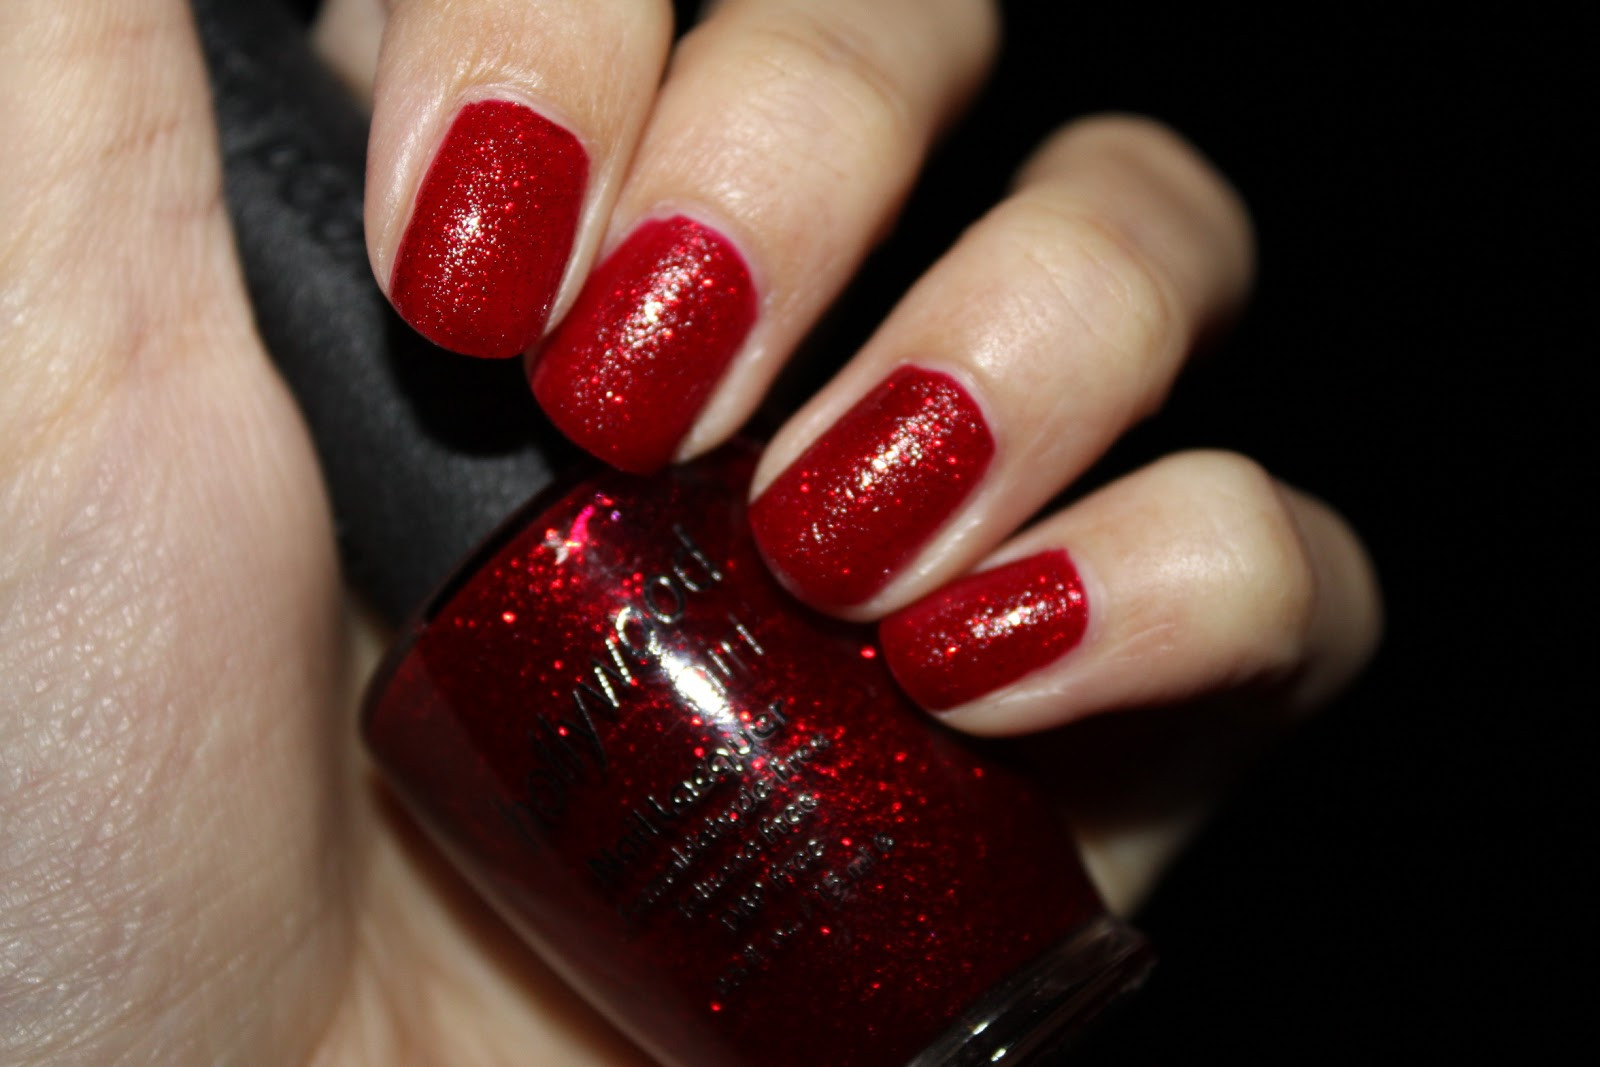 2. "The Best Holiday Nail Colors for Every Skin Tone" - wide 2